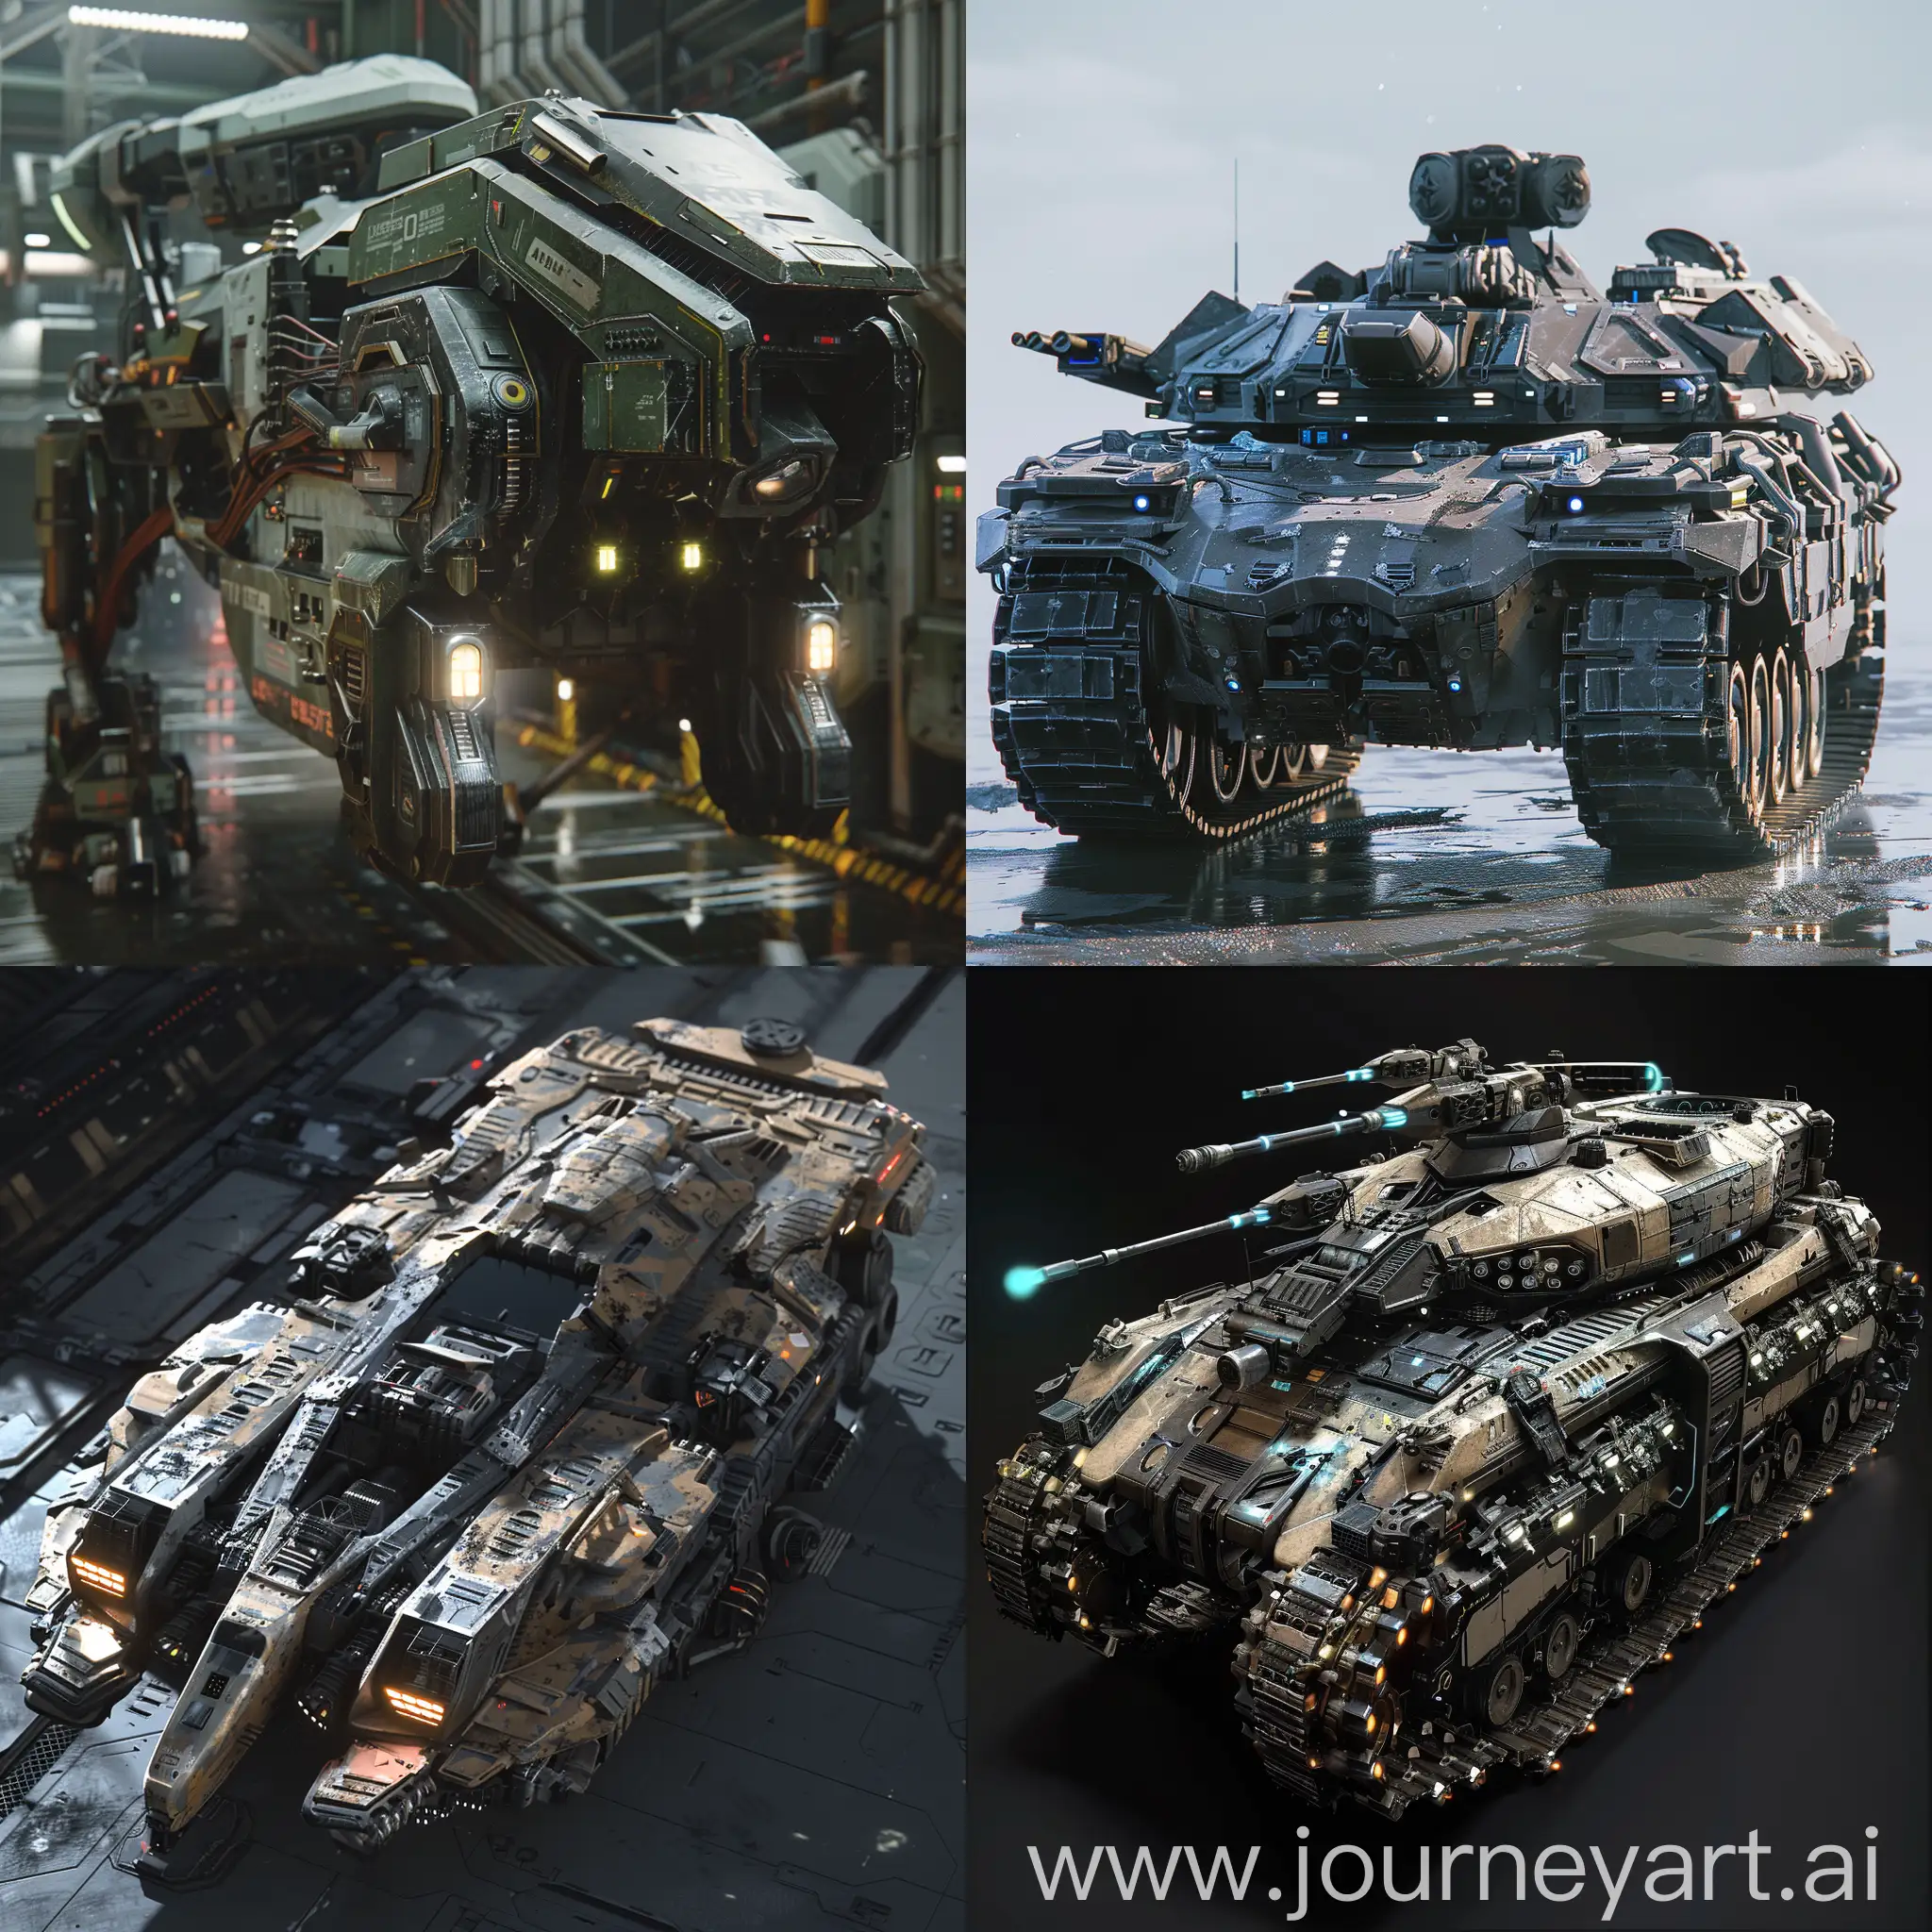 Futuristic-Tank-with-Symbiotic-AI-Engine-and-Advanced-Defensive-Systems